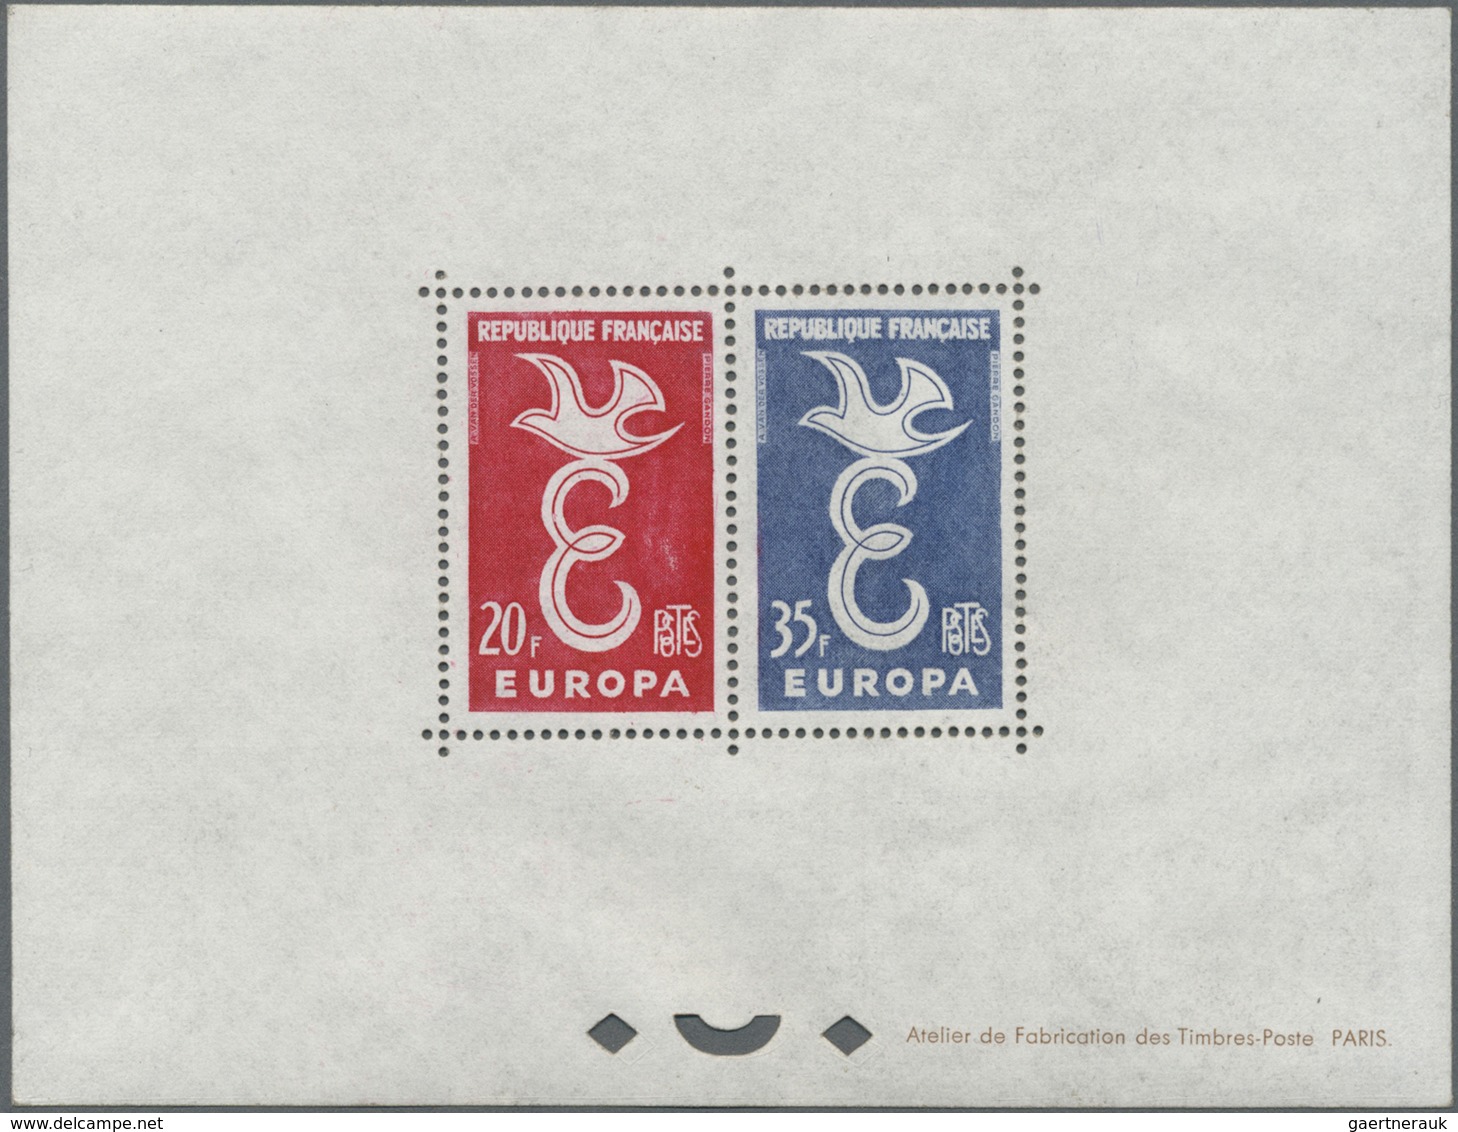 ** Thematik: Europa / Europe: 1958, France. EUROPA Issue (2 Values) As A Collective DeLuxe Sheet. Mint, - Europese Gedachte